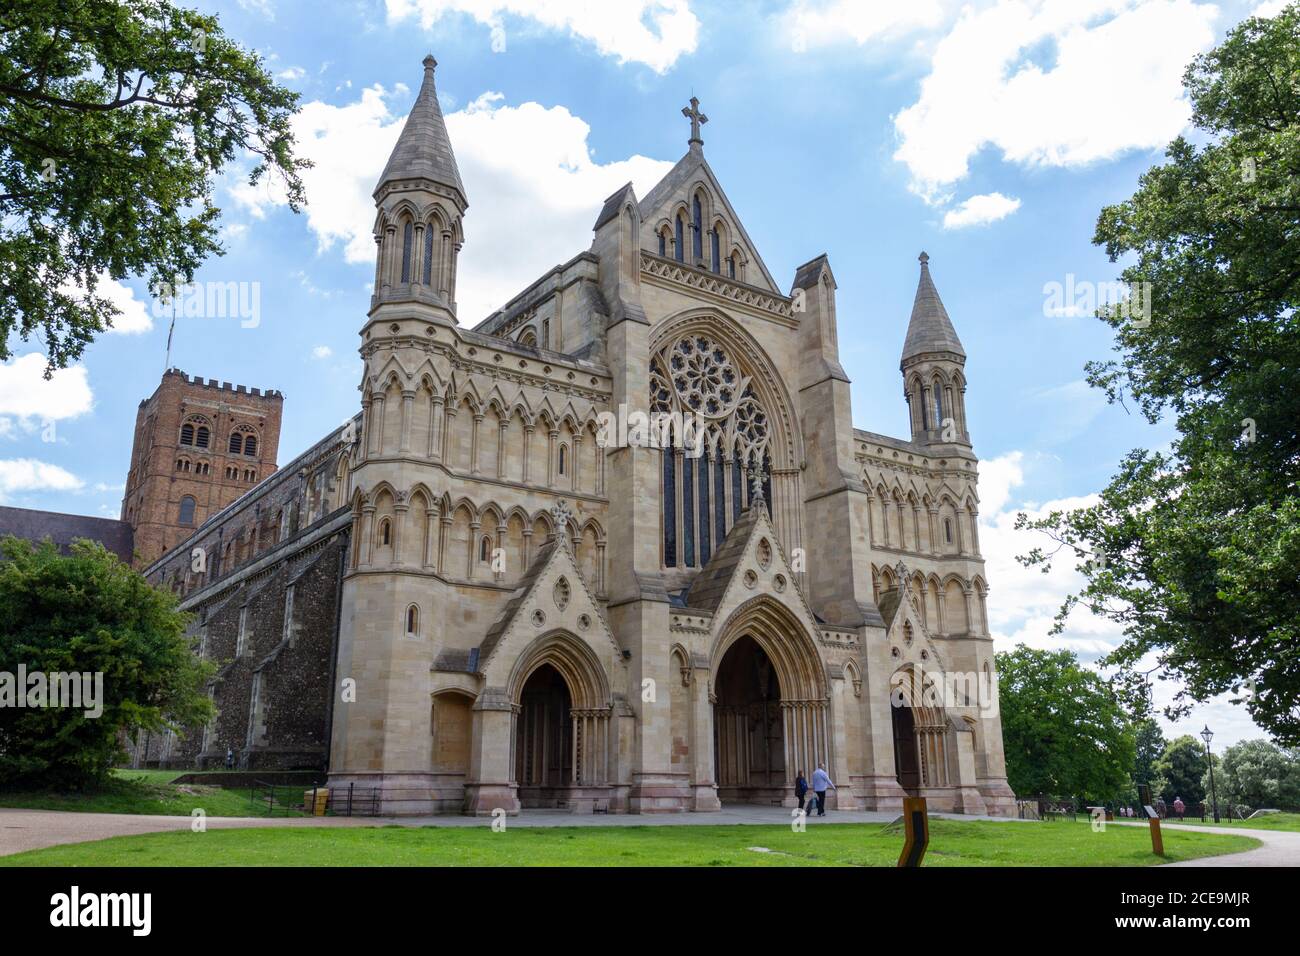 Exterior view of the western facade of Cathedral & Abbey Church of Saint Alban, St Albans, Hertfordshire, UK. Stock Photo